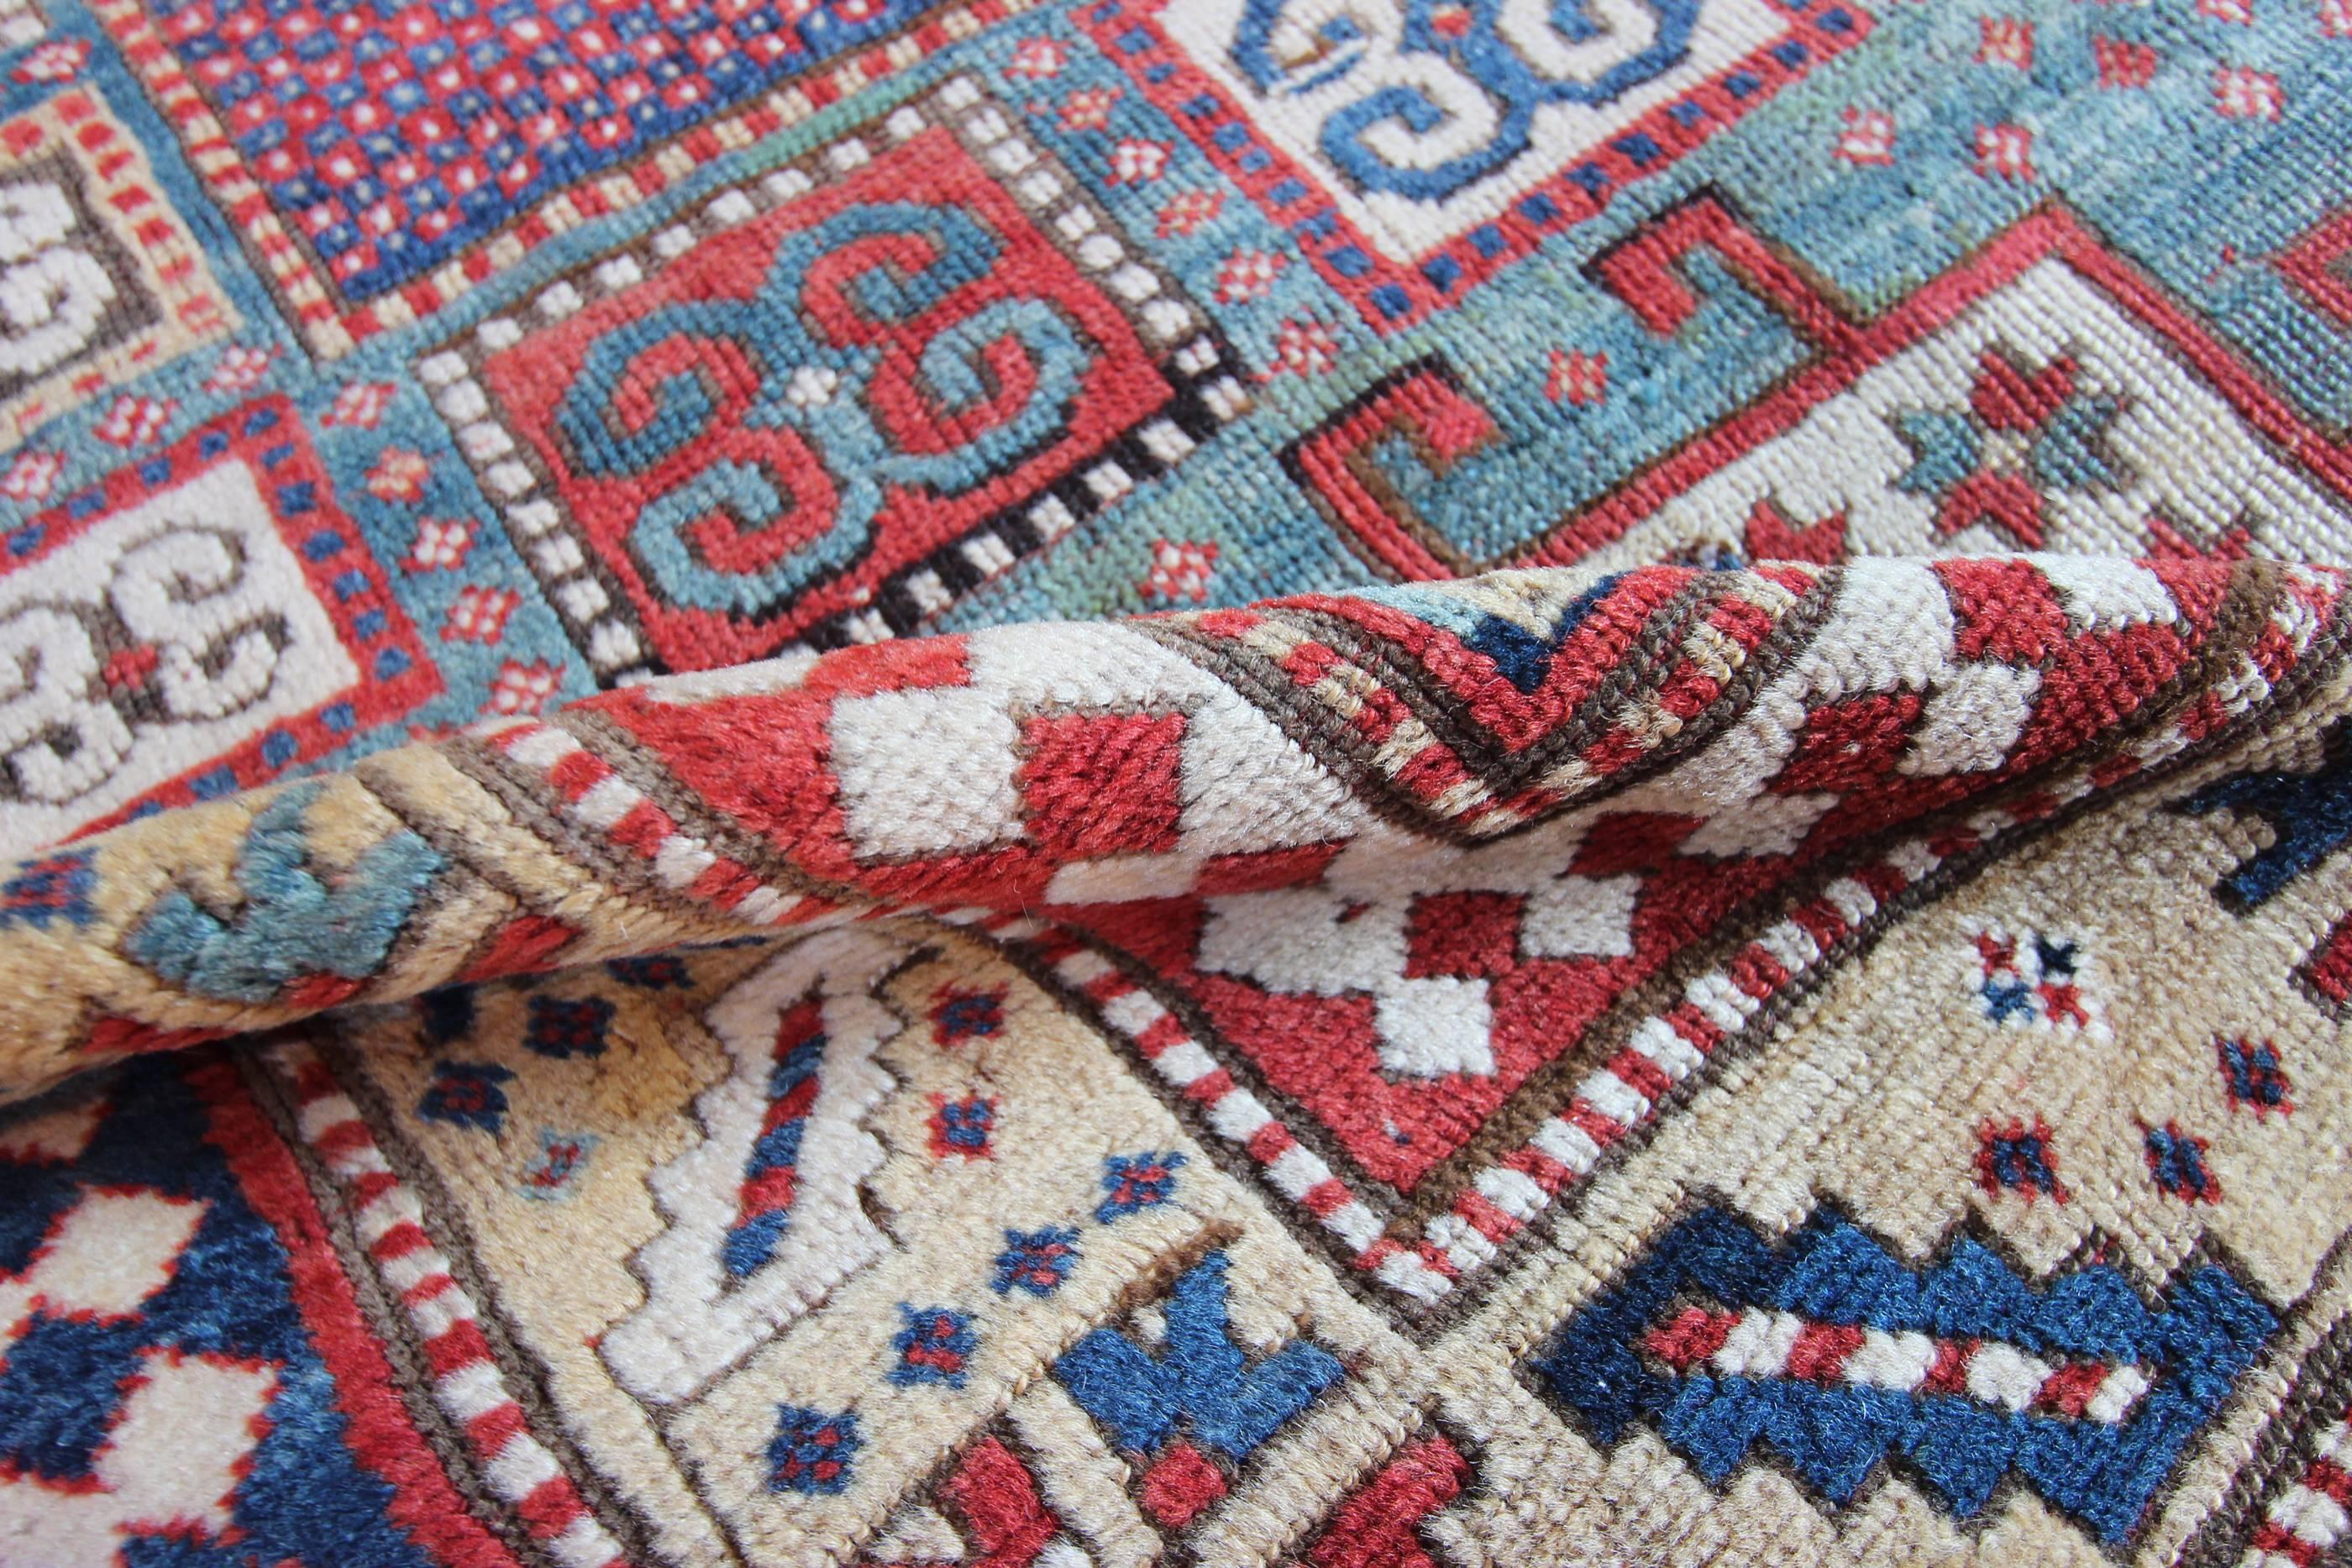 A bold and vivid antique Karachov Kazak rug woven in the Caucasus mountains in Azerbaijan by Armenian weavers. Also known as "Karachopf" these tribal weavings were made using soft wool on a woollen foundation, giving them a light feel to